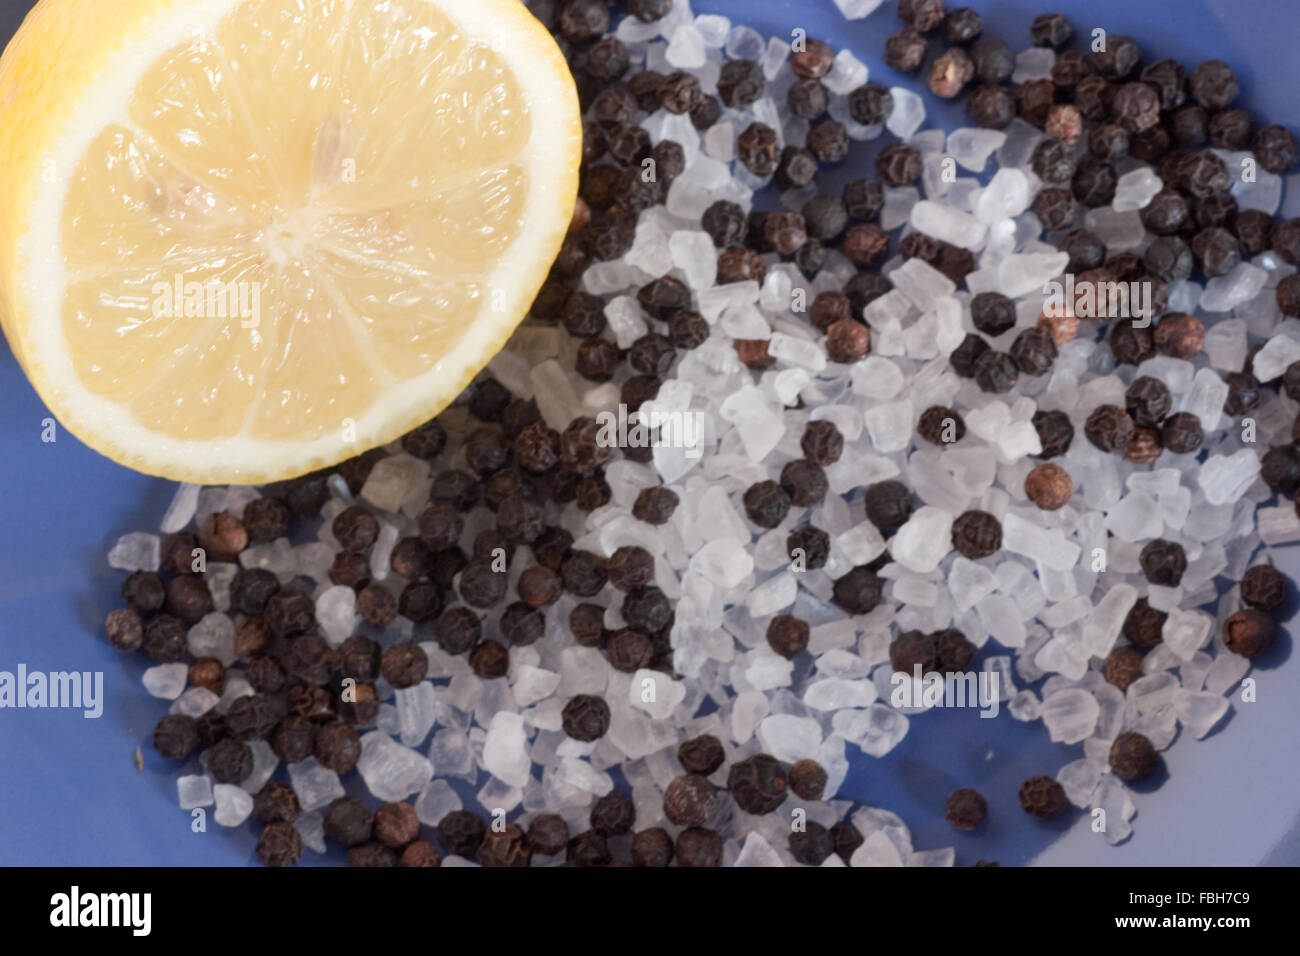 Lemon cut in half with sea salt and black peppercorns on a blue background Stock Photo